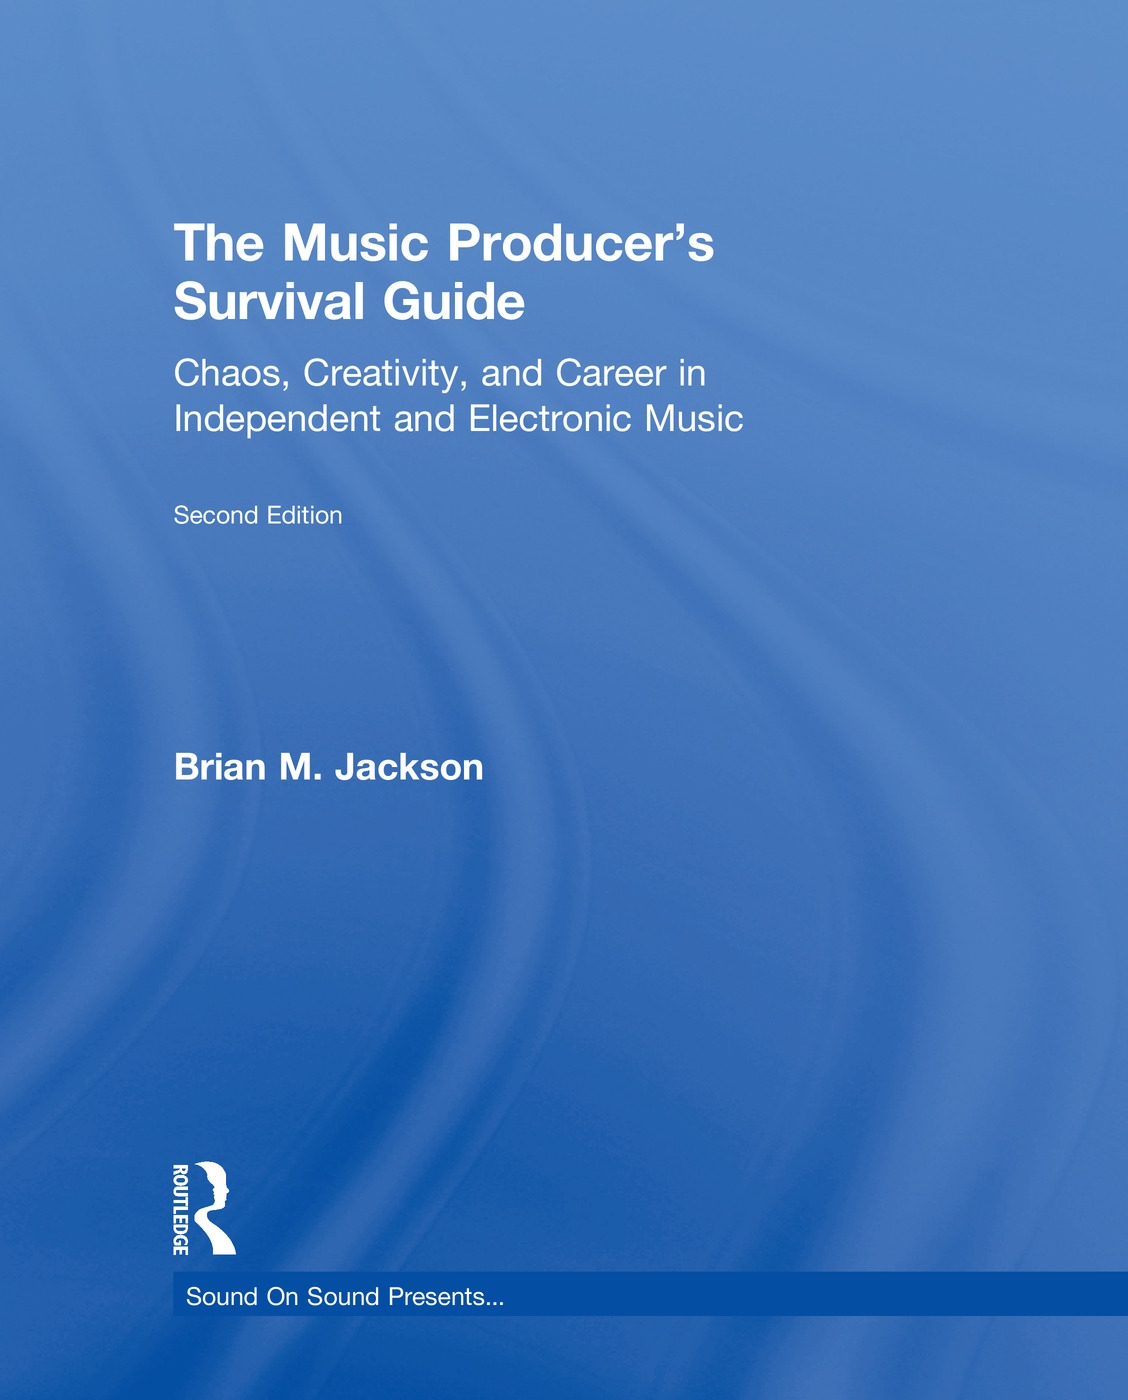 The Music Producer’s Survival Guide: Chaos, Creativity, and Career in Independent and Electronic Music